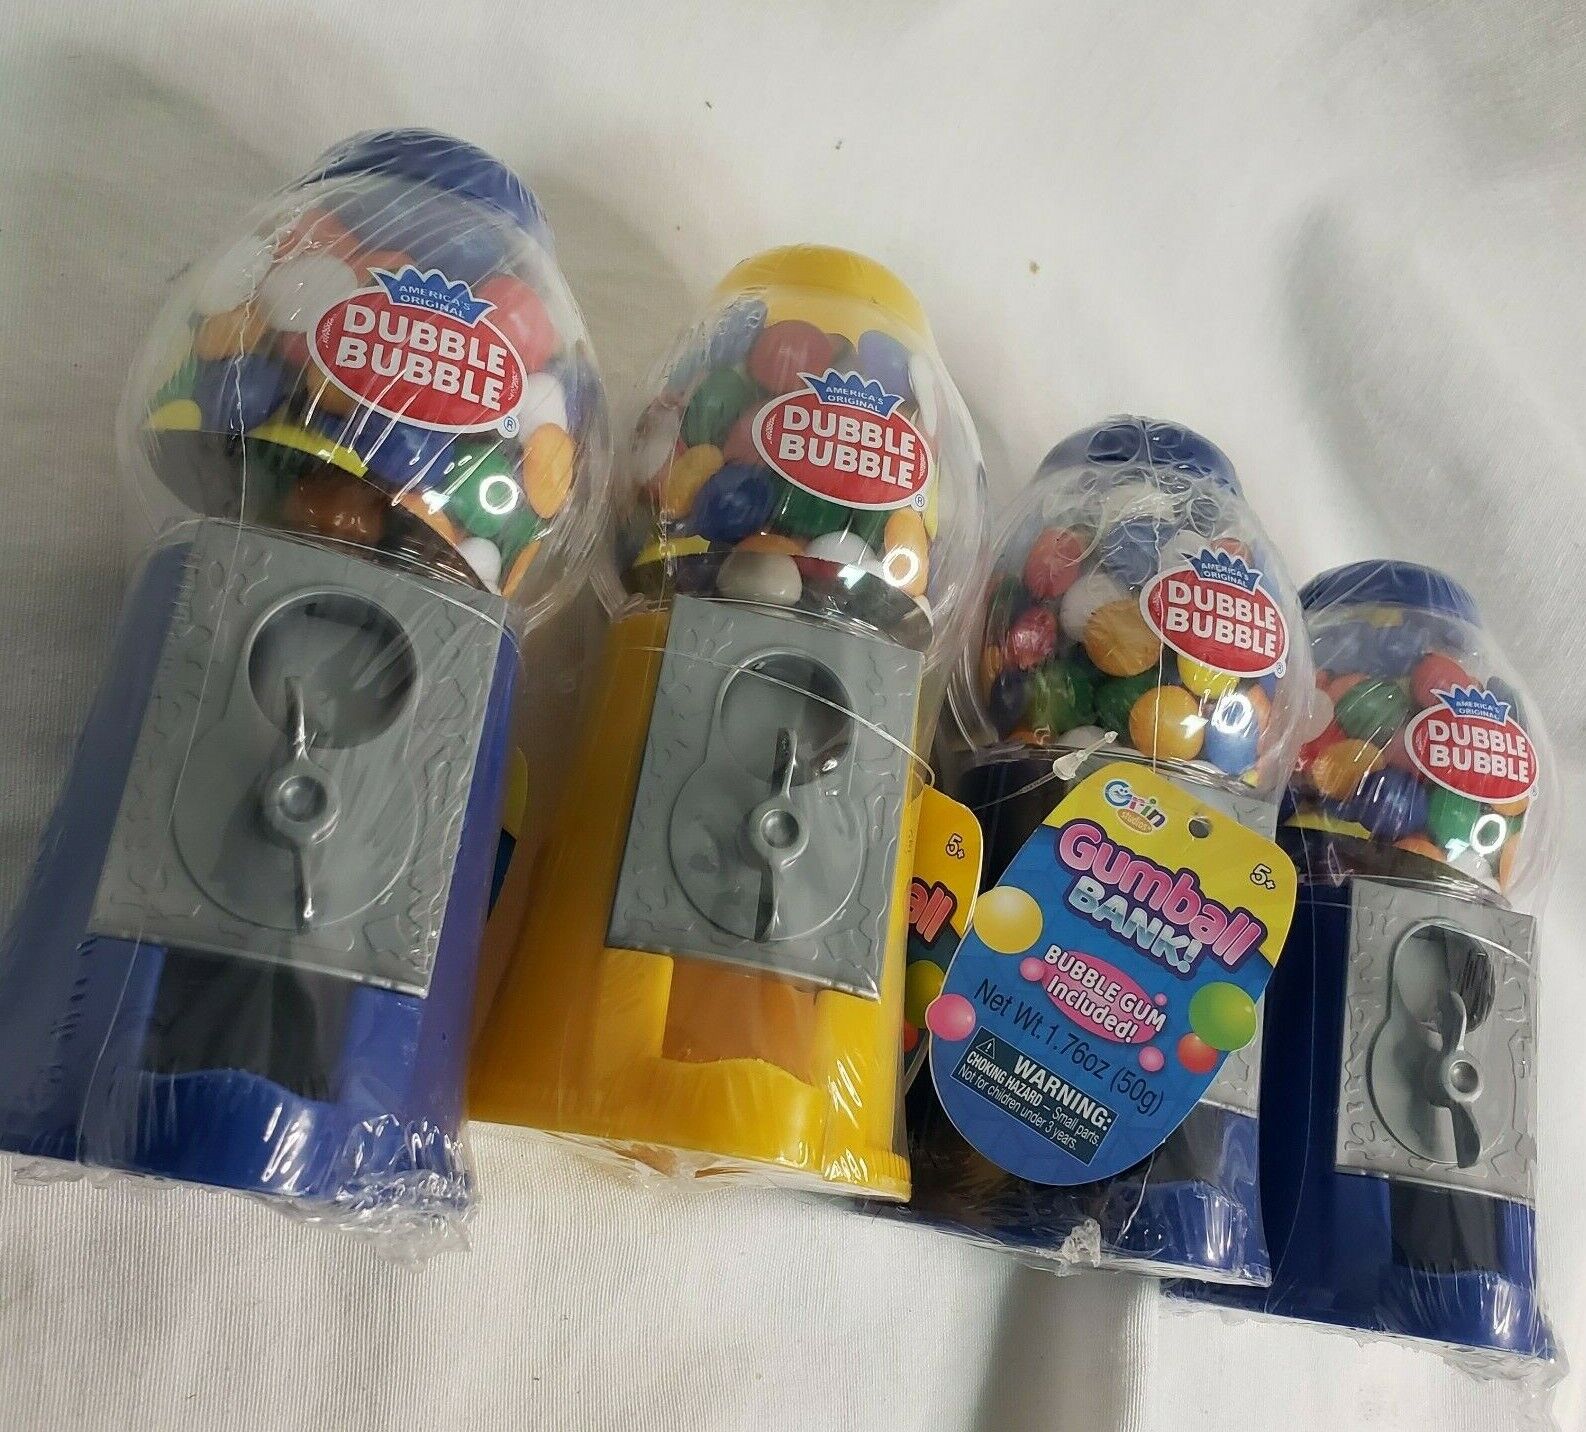 Grin Studios Dubble Bubble Gumball Coin Operated Toy, BB Oct/30/2022 - Lot of 4